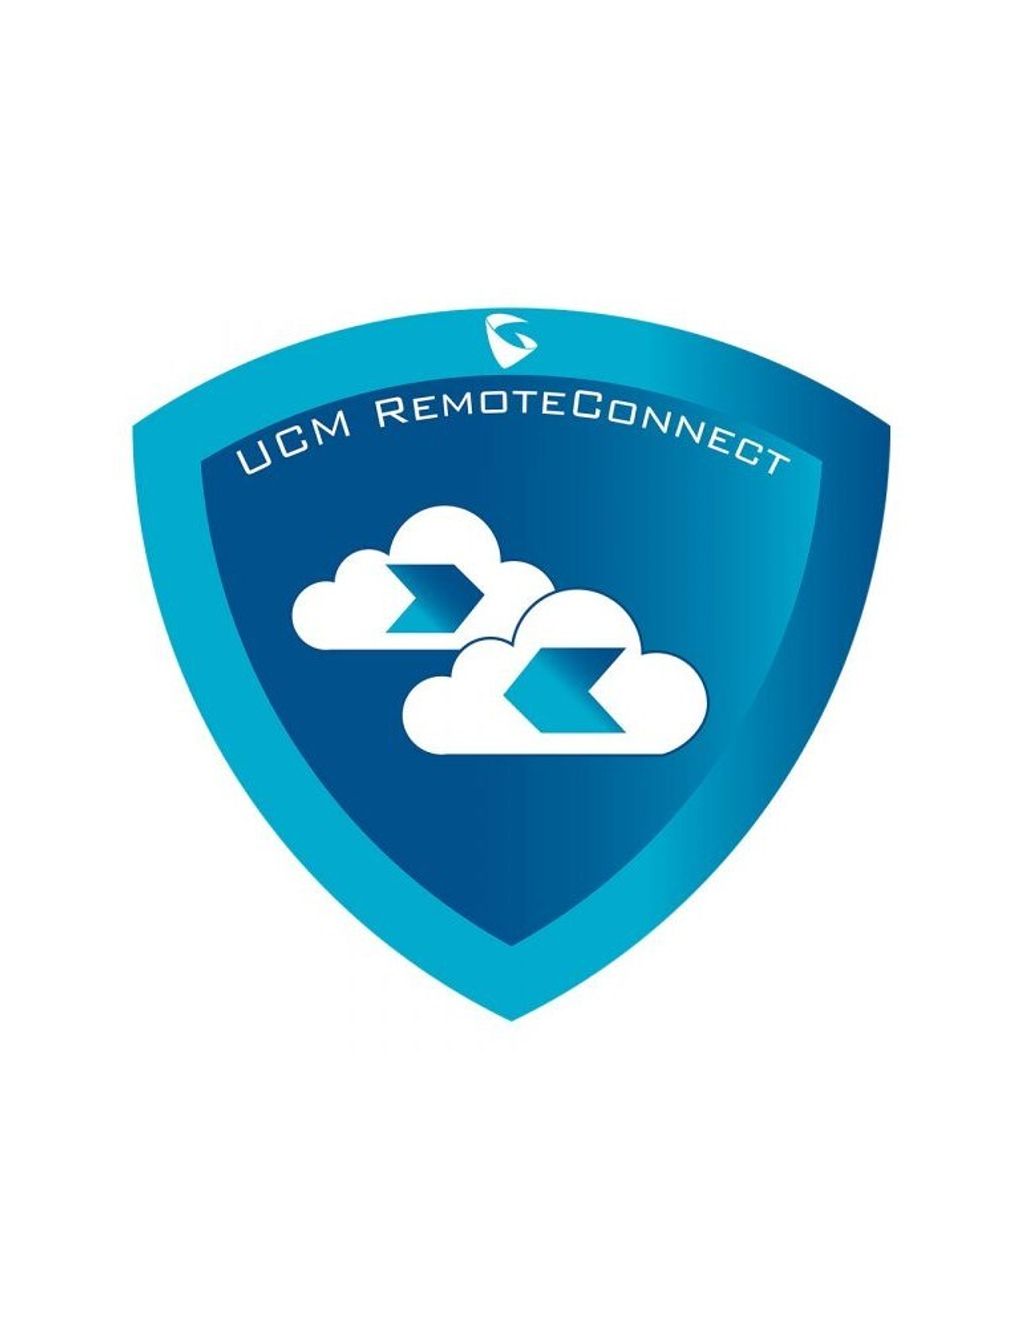 ucm-remote-connect-business